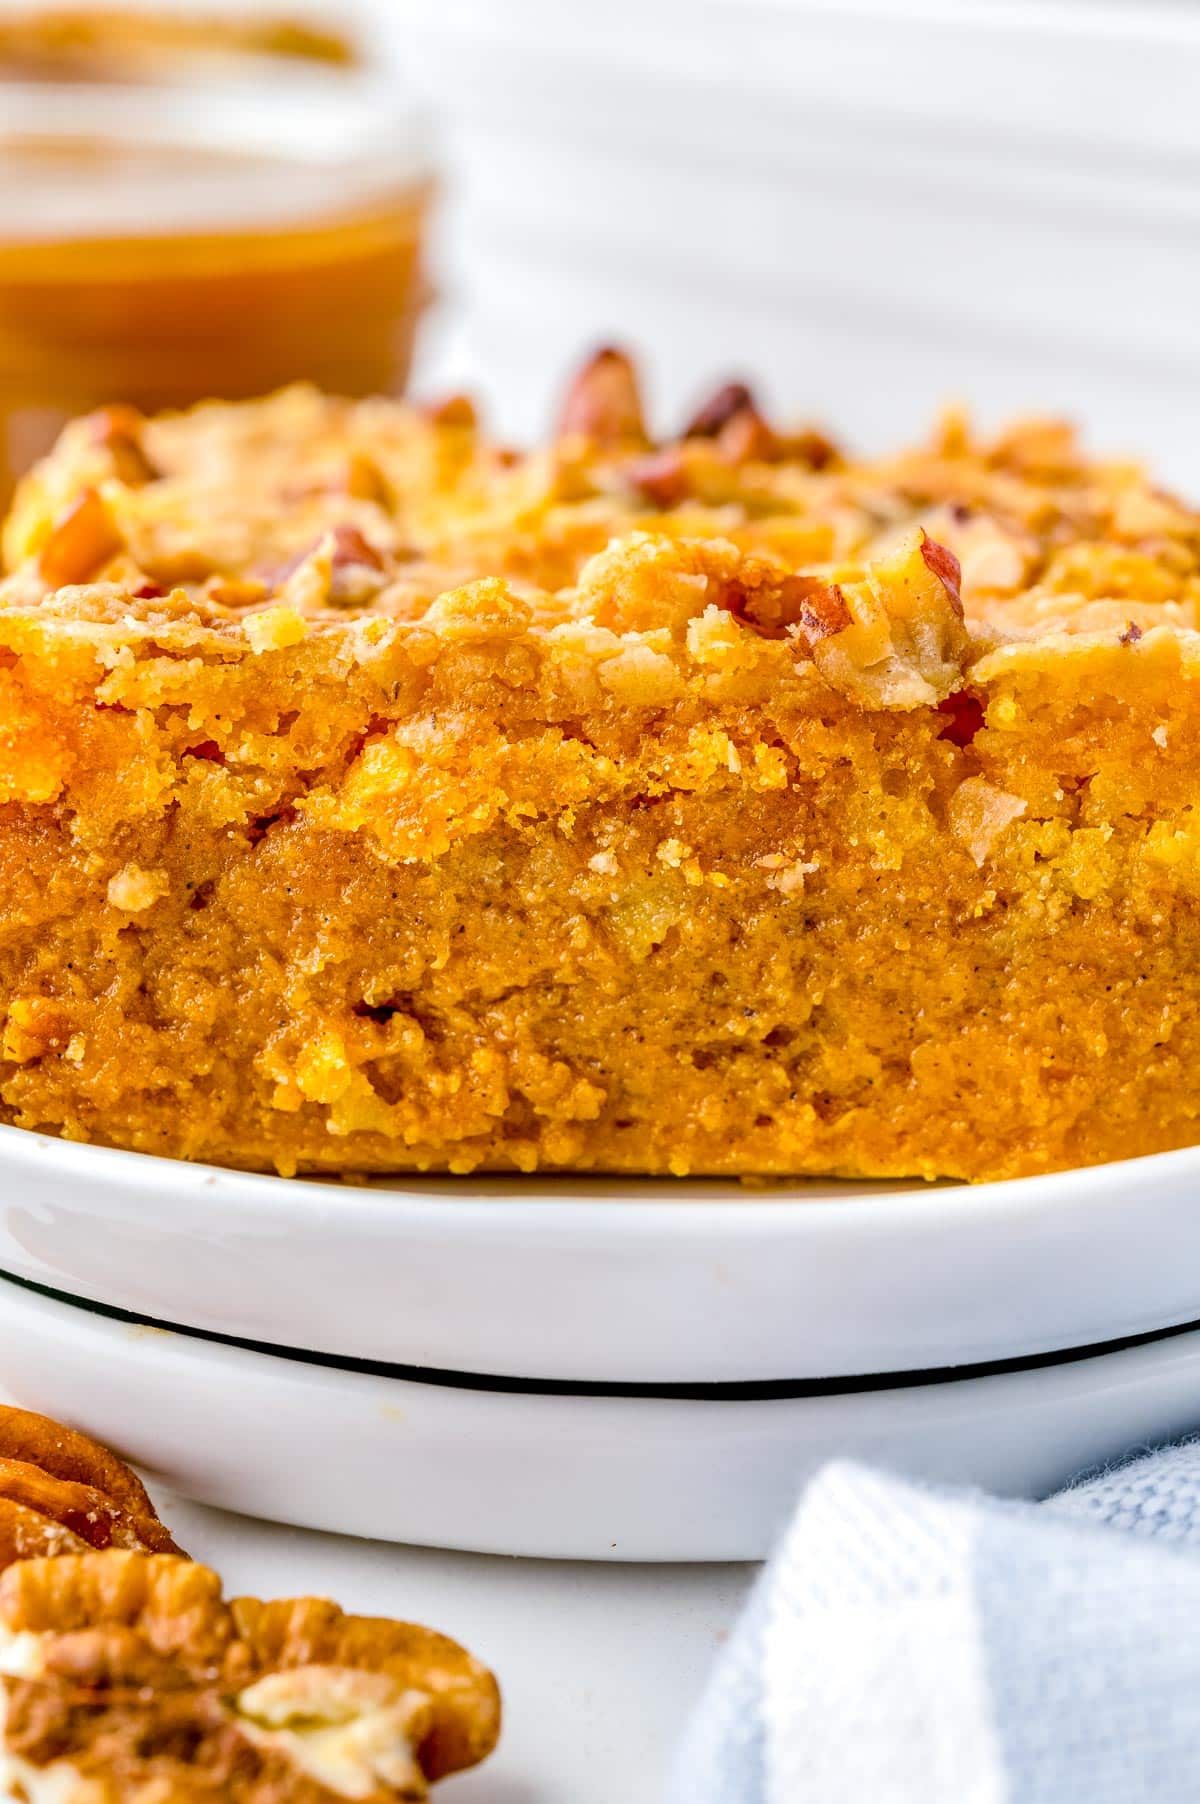 A close up picture of a slice of Pumpkin Dump Cake on a white plate.